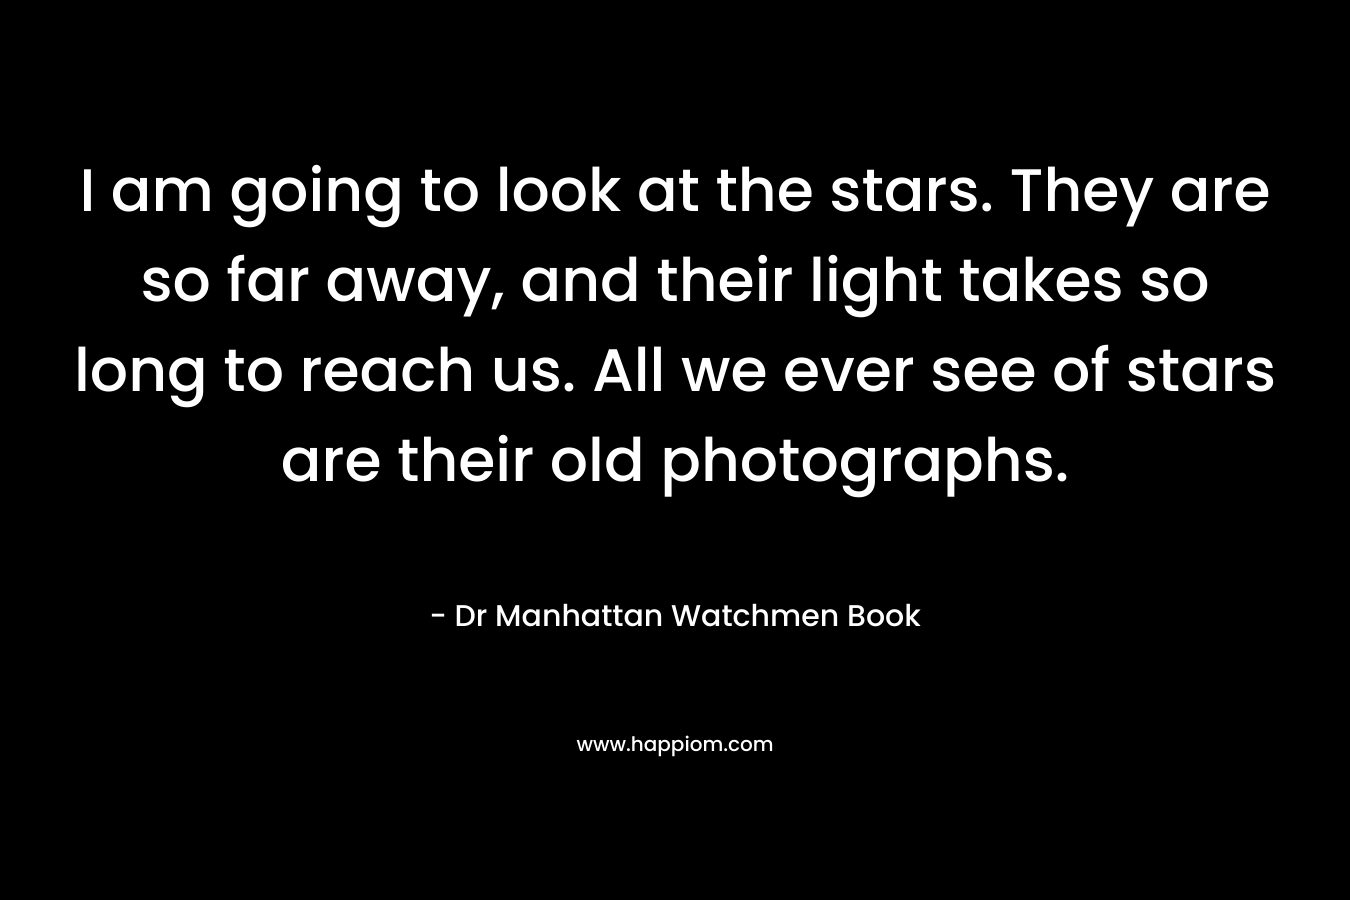 I am going to look at the stars. They are so far away, and their light takes so long to reach us. All we ever see of stars are their old photographs.